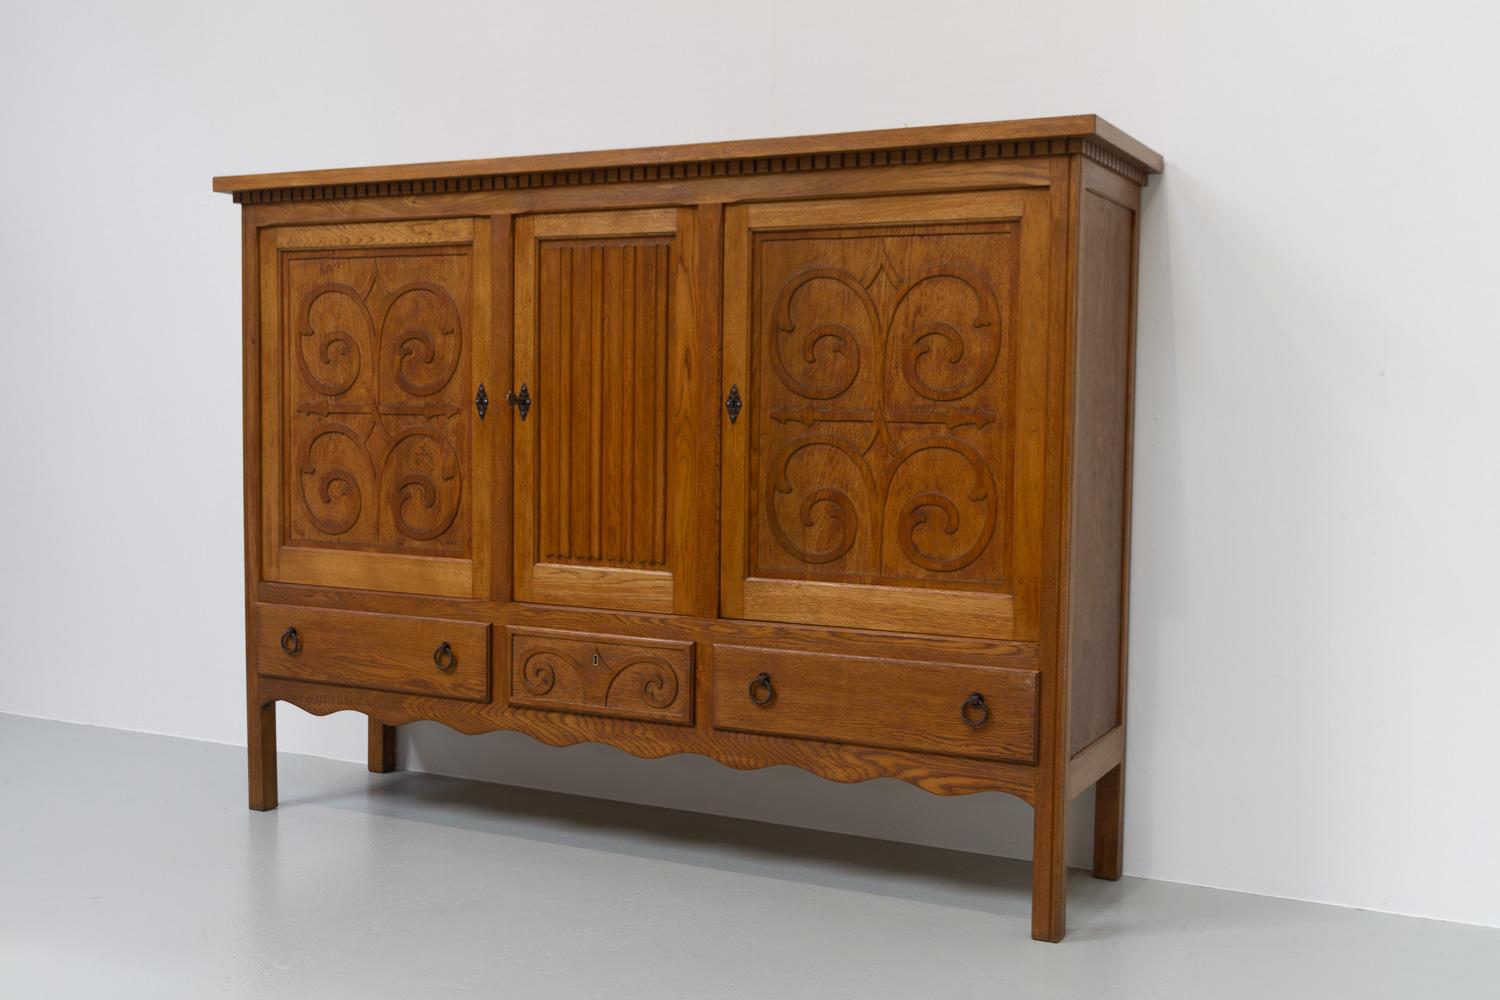 Danish Modern Brutalist Sideboard in Oak, 1950s.
Beautiful and sculptural Mid-Century Modern Danish highboard in oak that offers plenty of storage space. Made in Denmark in the 1950s with hand carved details and wrought iron drawer pulls. 

This